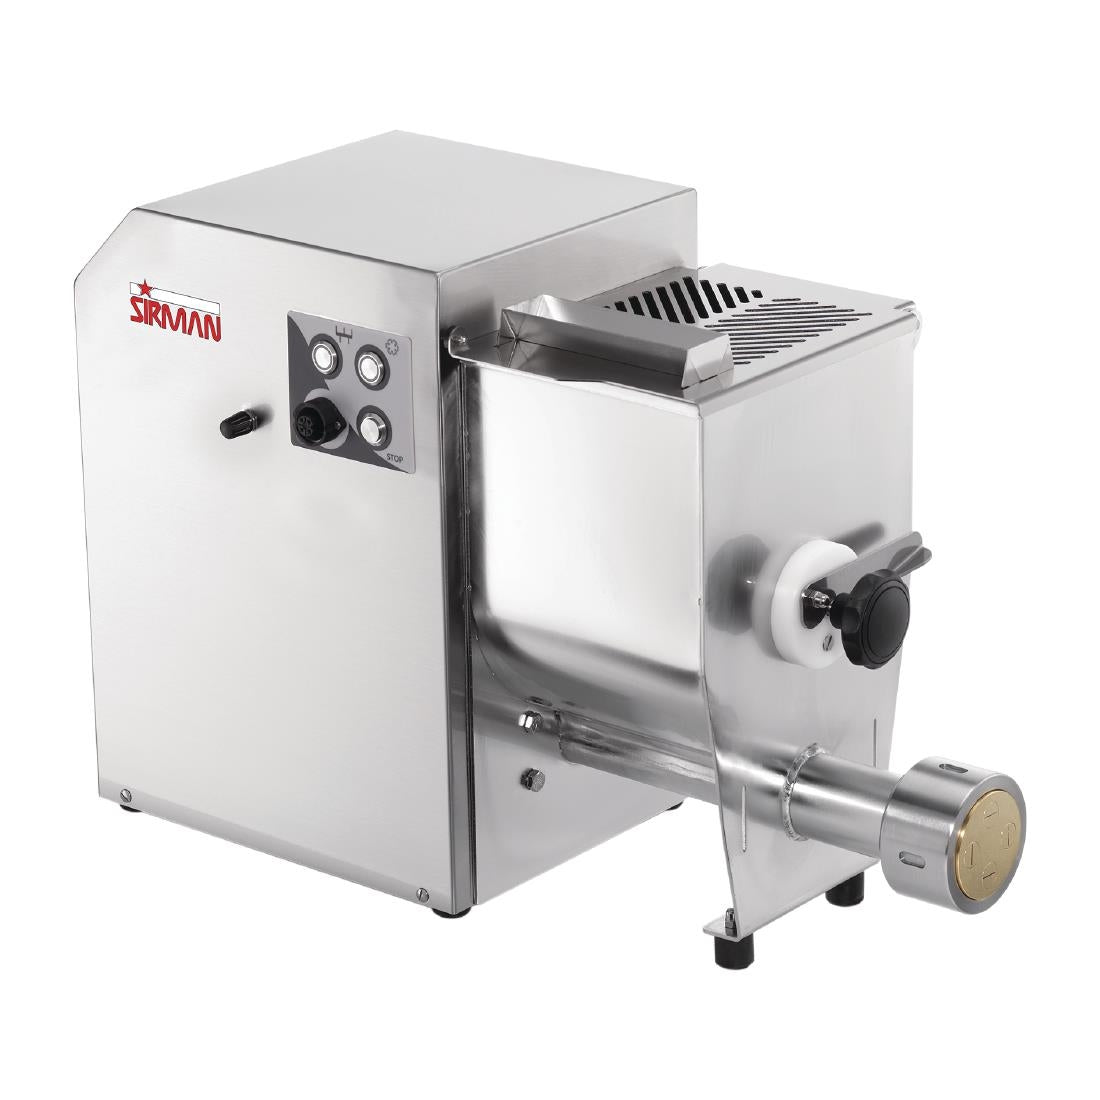 DM689-LIN Sirman Concerto 5 Pasta Machine with Linguine 3x1.6mm Die JD Catering Equipment Solutions Ltd